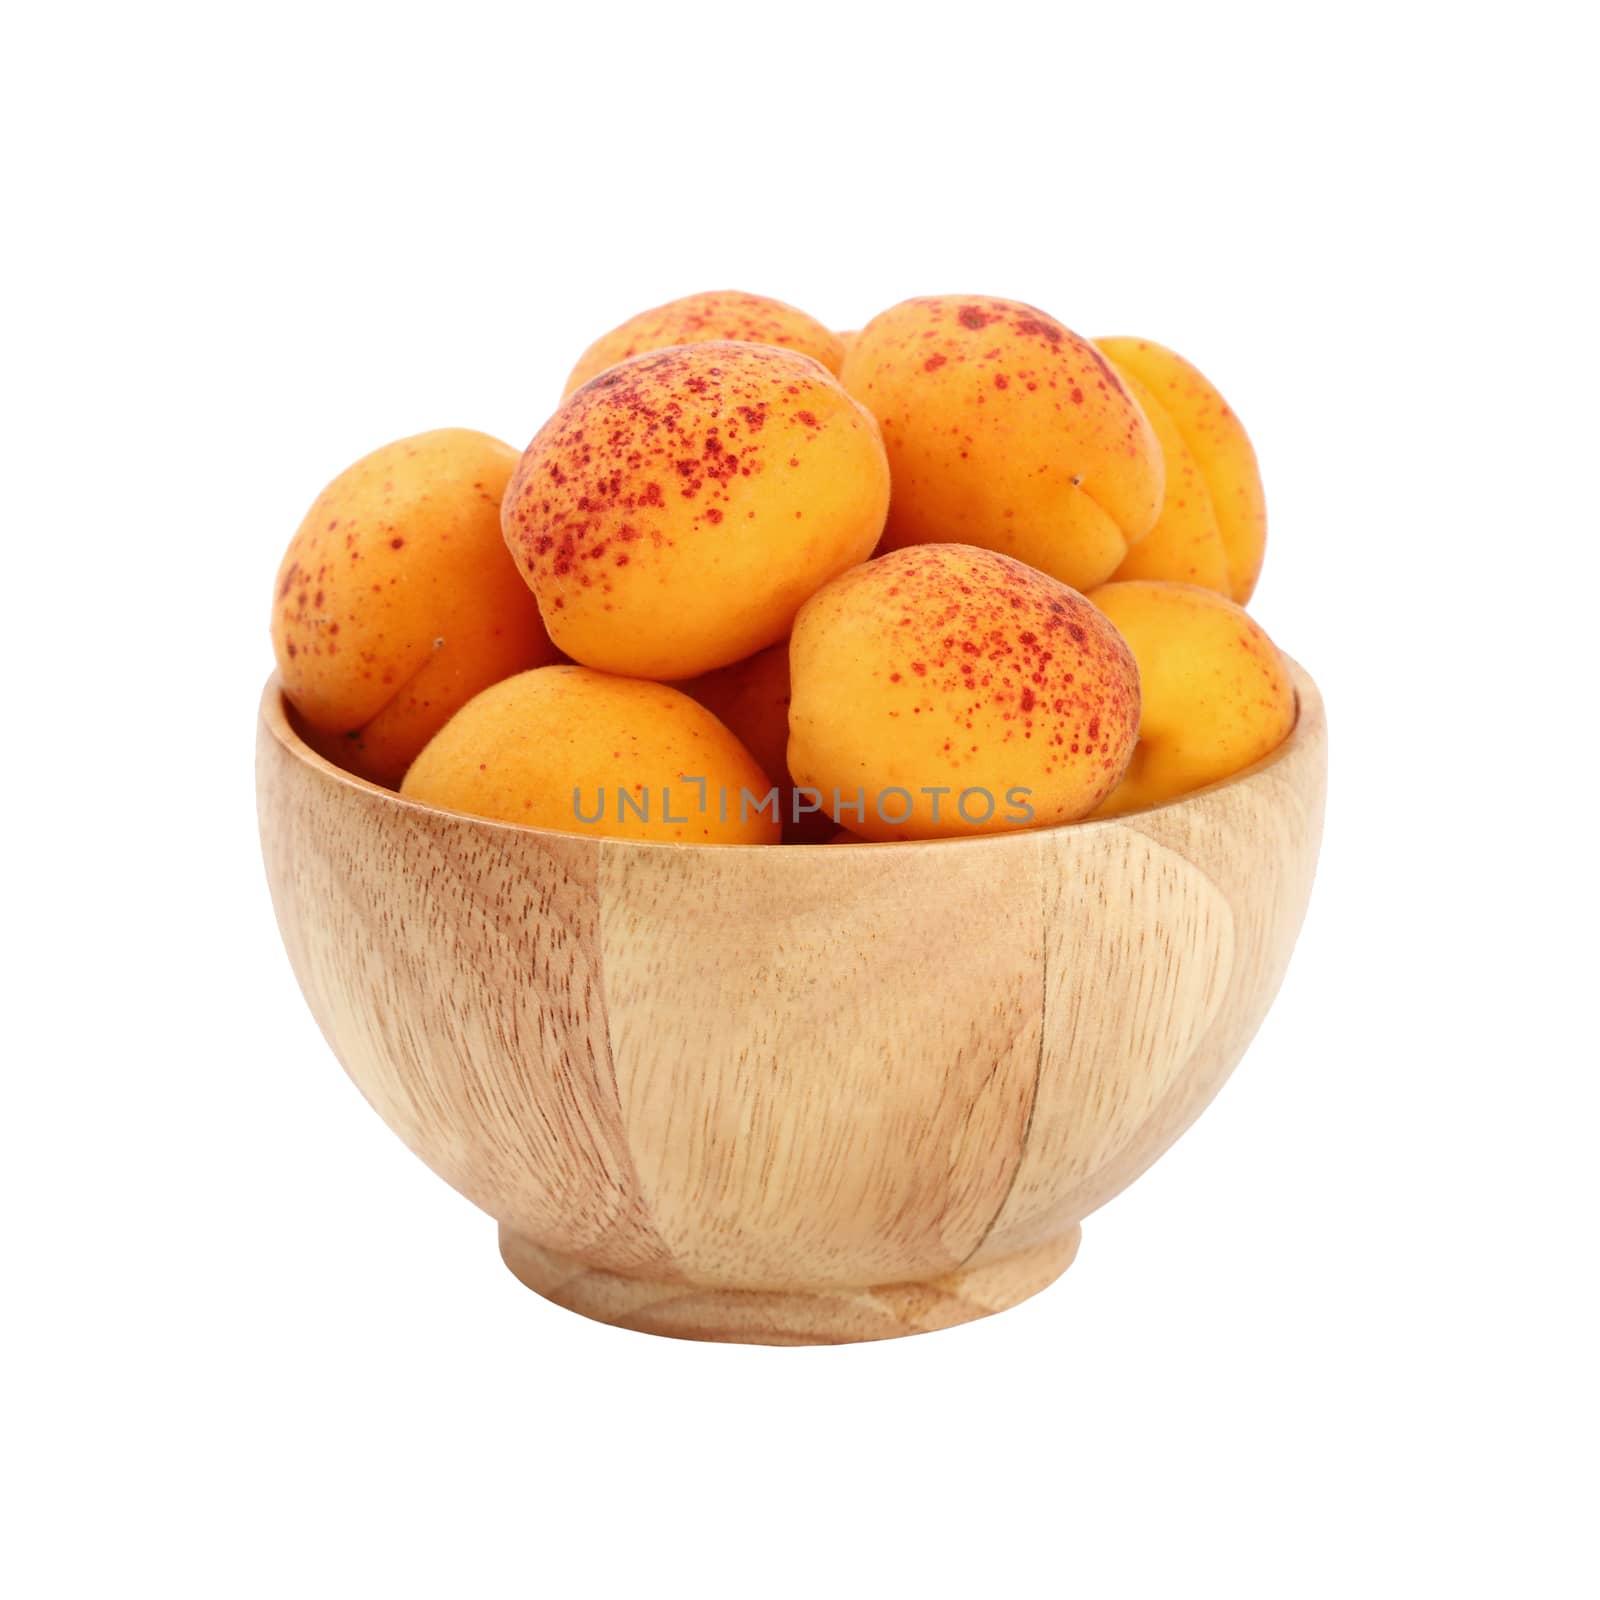 Mellow ripe fresh apricots with in small wooden bowl isolated on white background, close up, side view